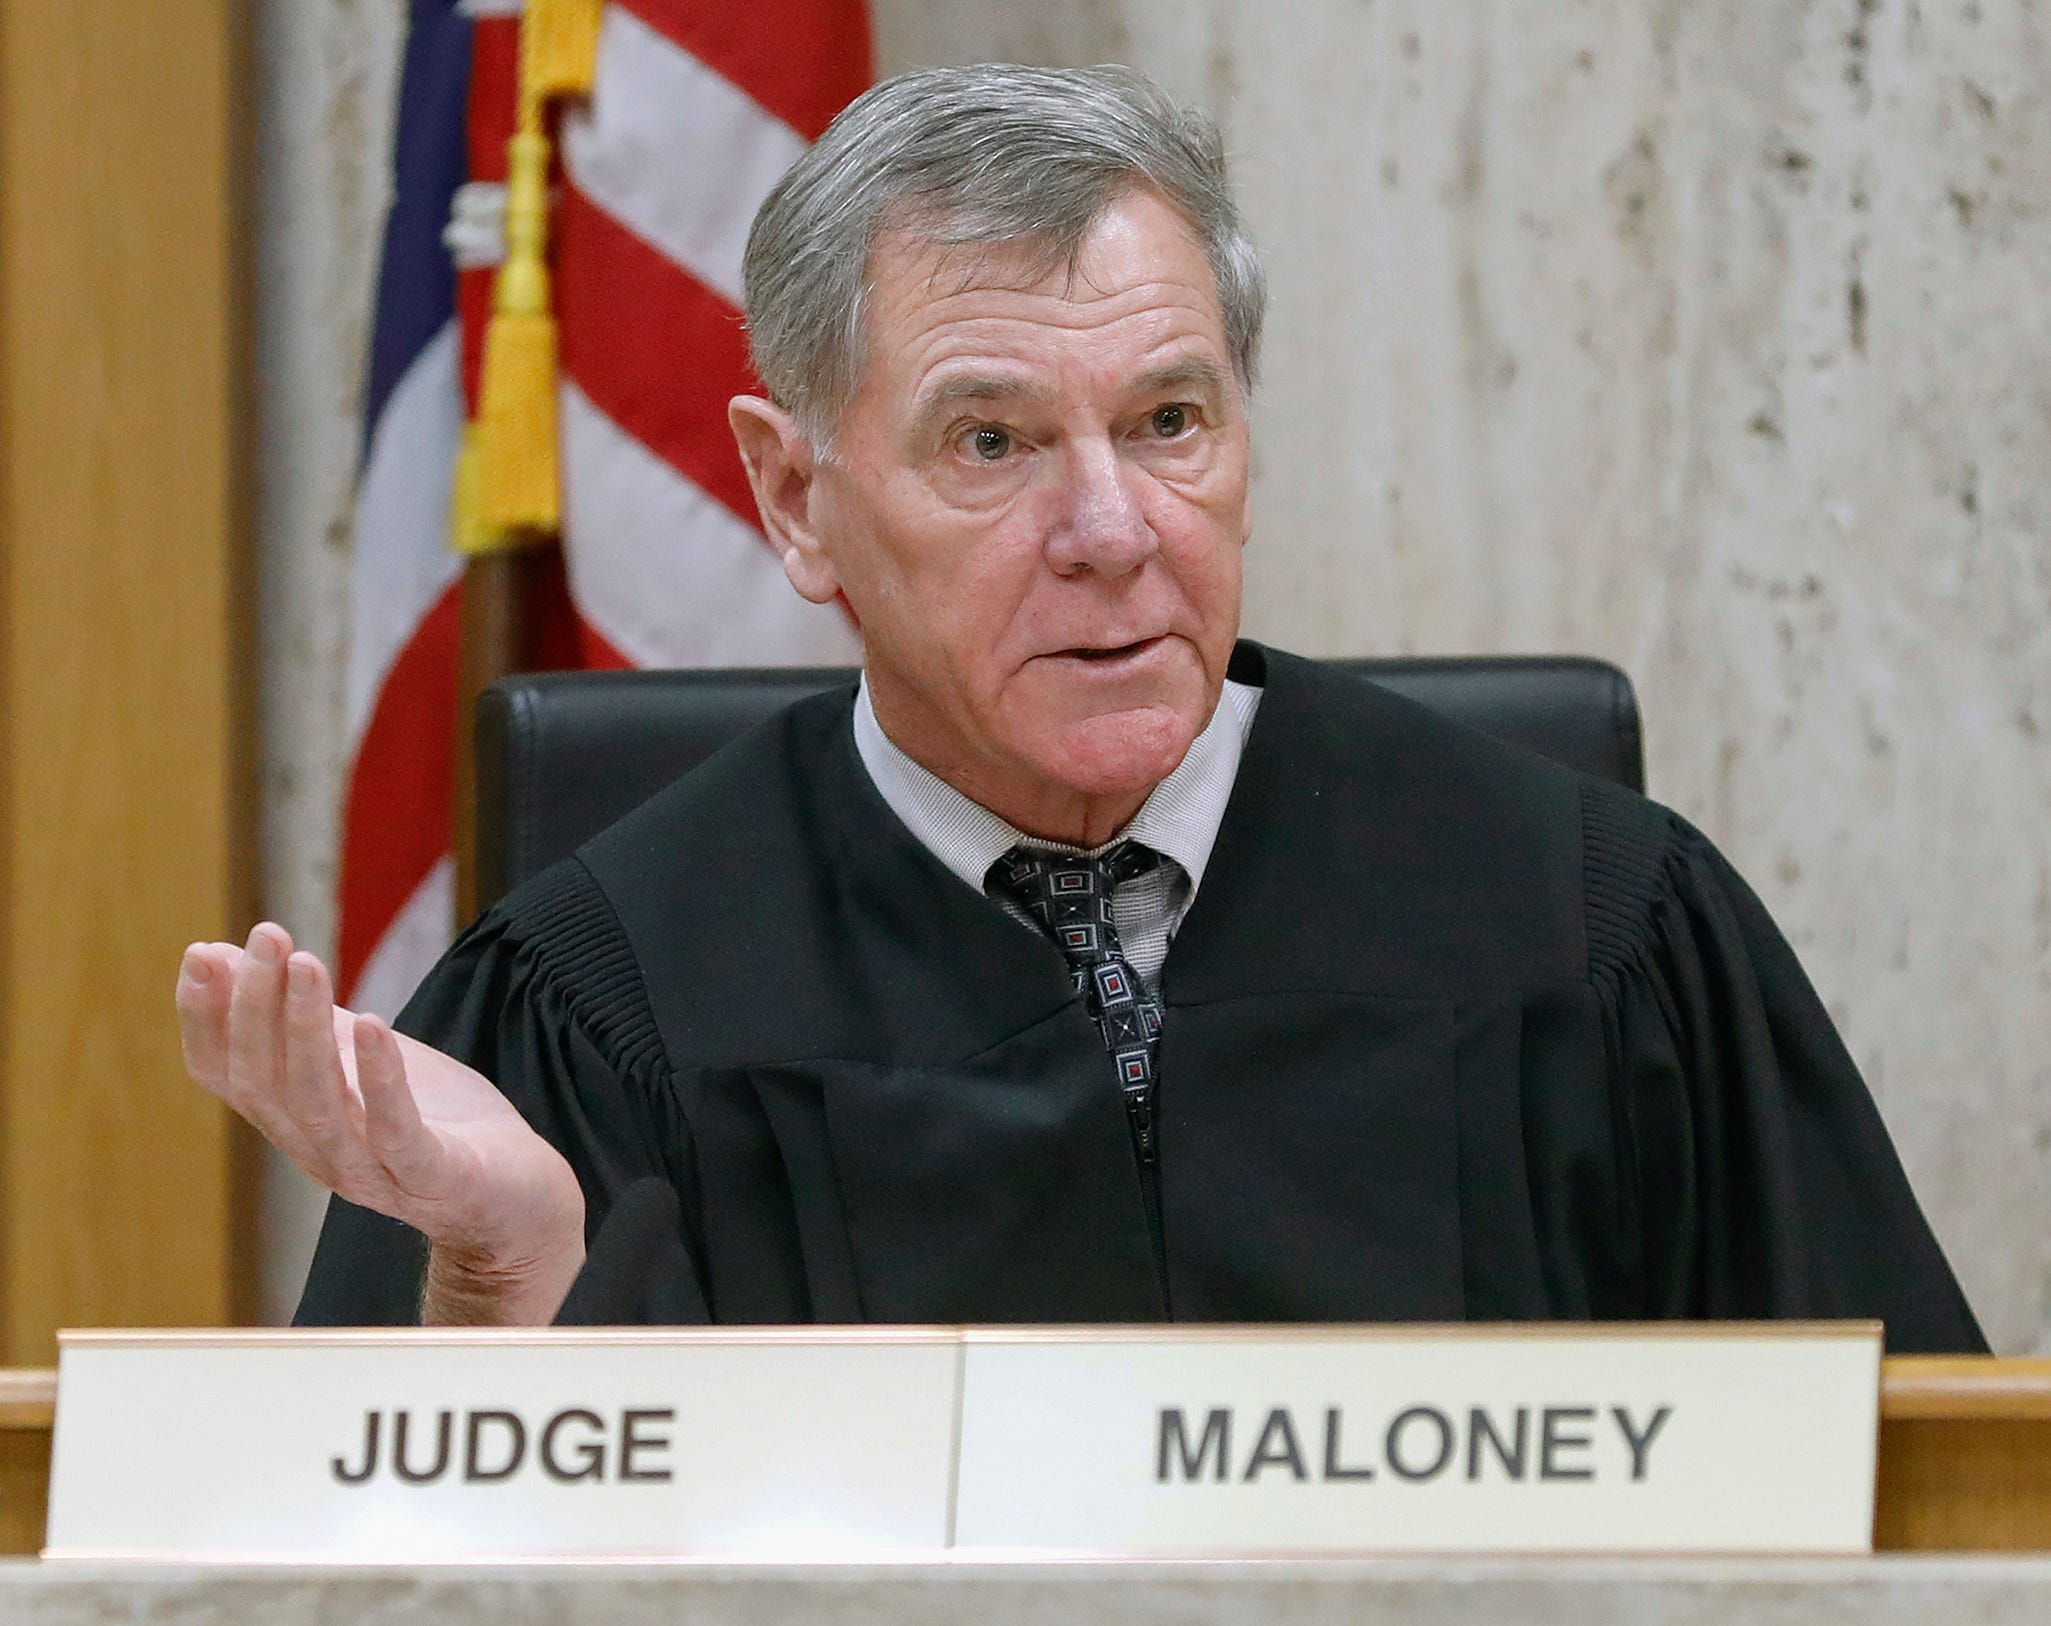 Dennis Maloney, now a Senior Judge for the 10th Judicial Circuit, which comprises Hardee, Highlands and Polk counties, handed down the 90-year sentences in 1989 to Richard and Ted DeLisi.